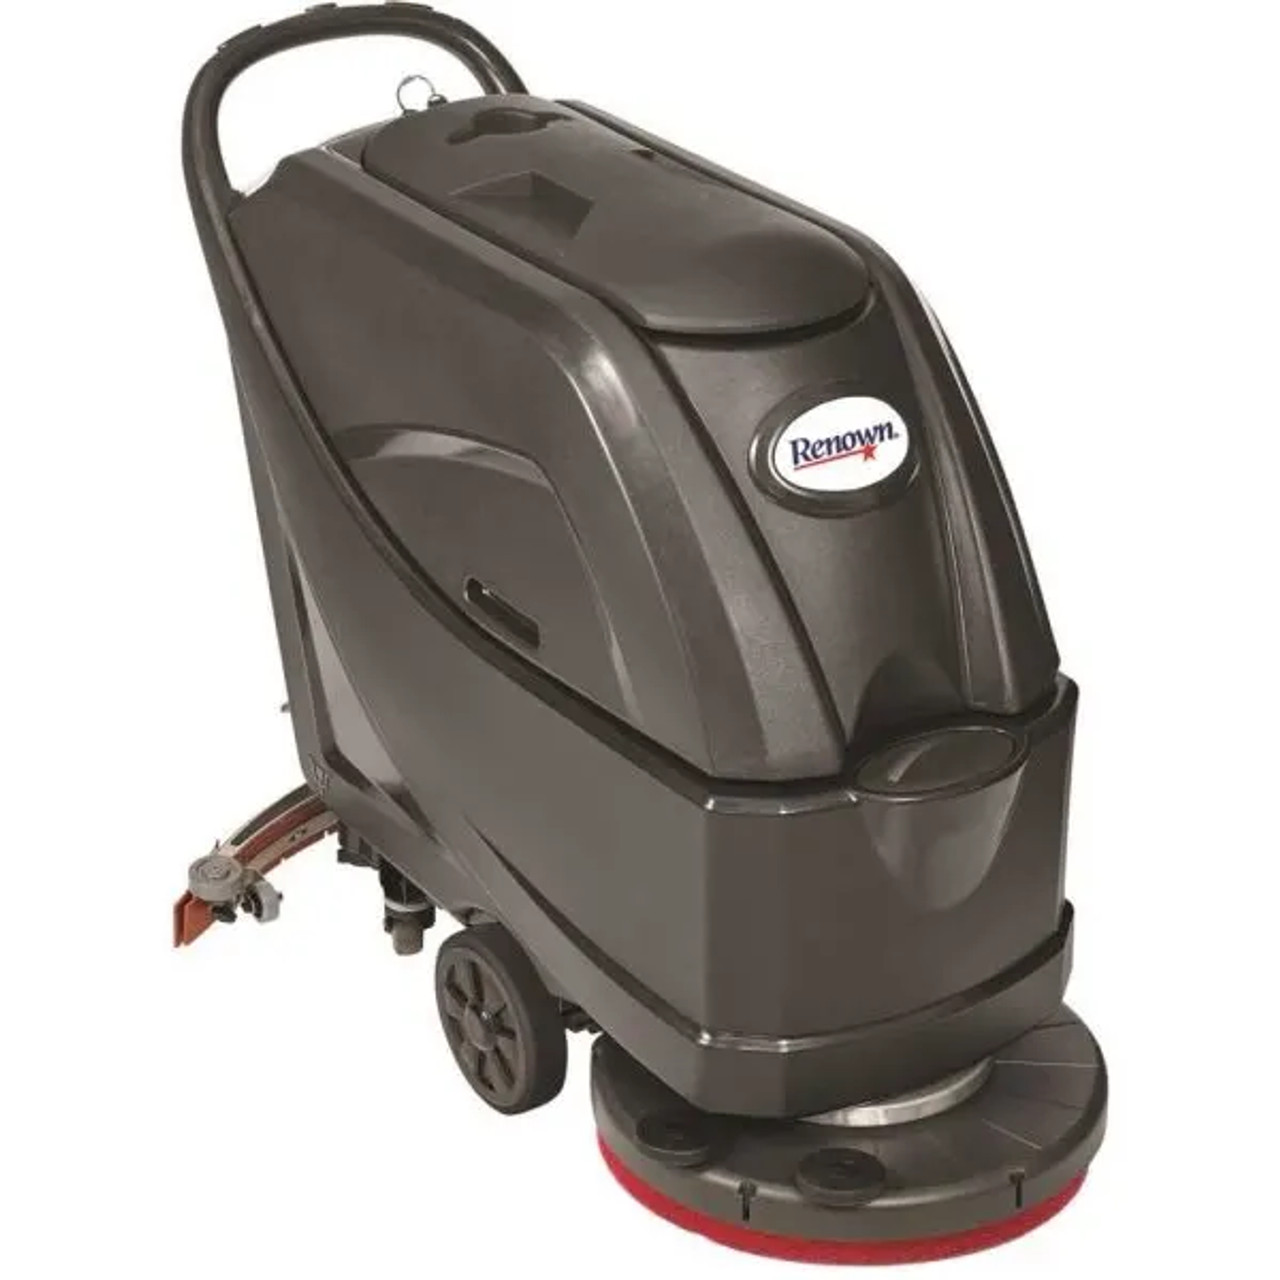 Renown 20 Walk Behind Auto Scrubber With 16 Gal Tank Pad Assist